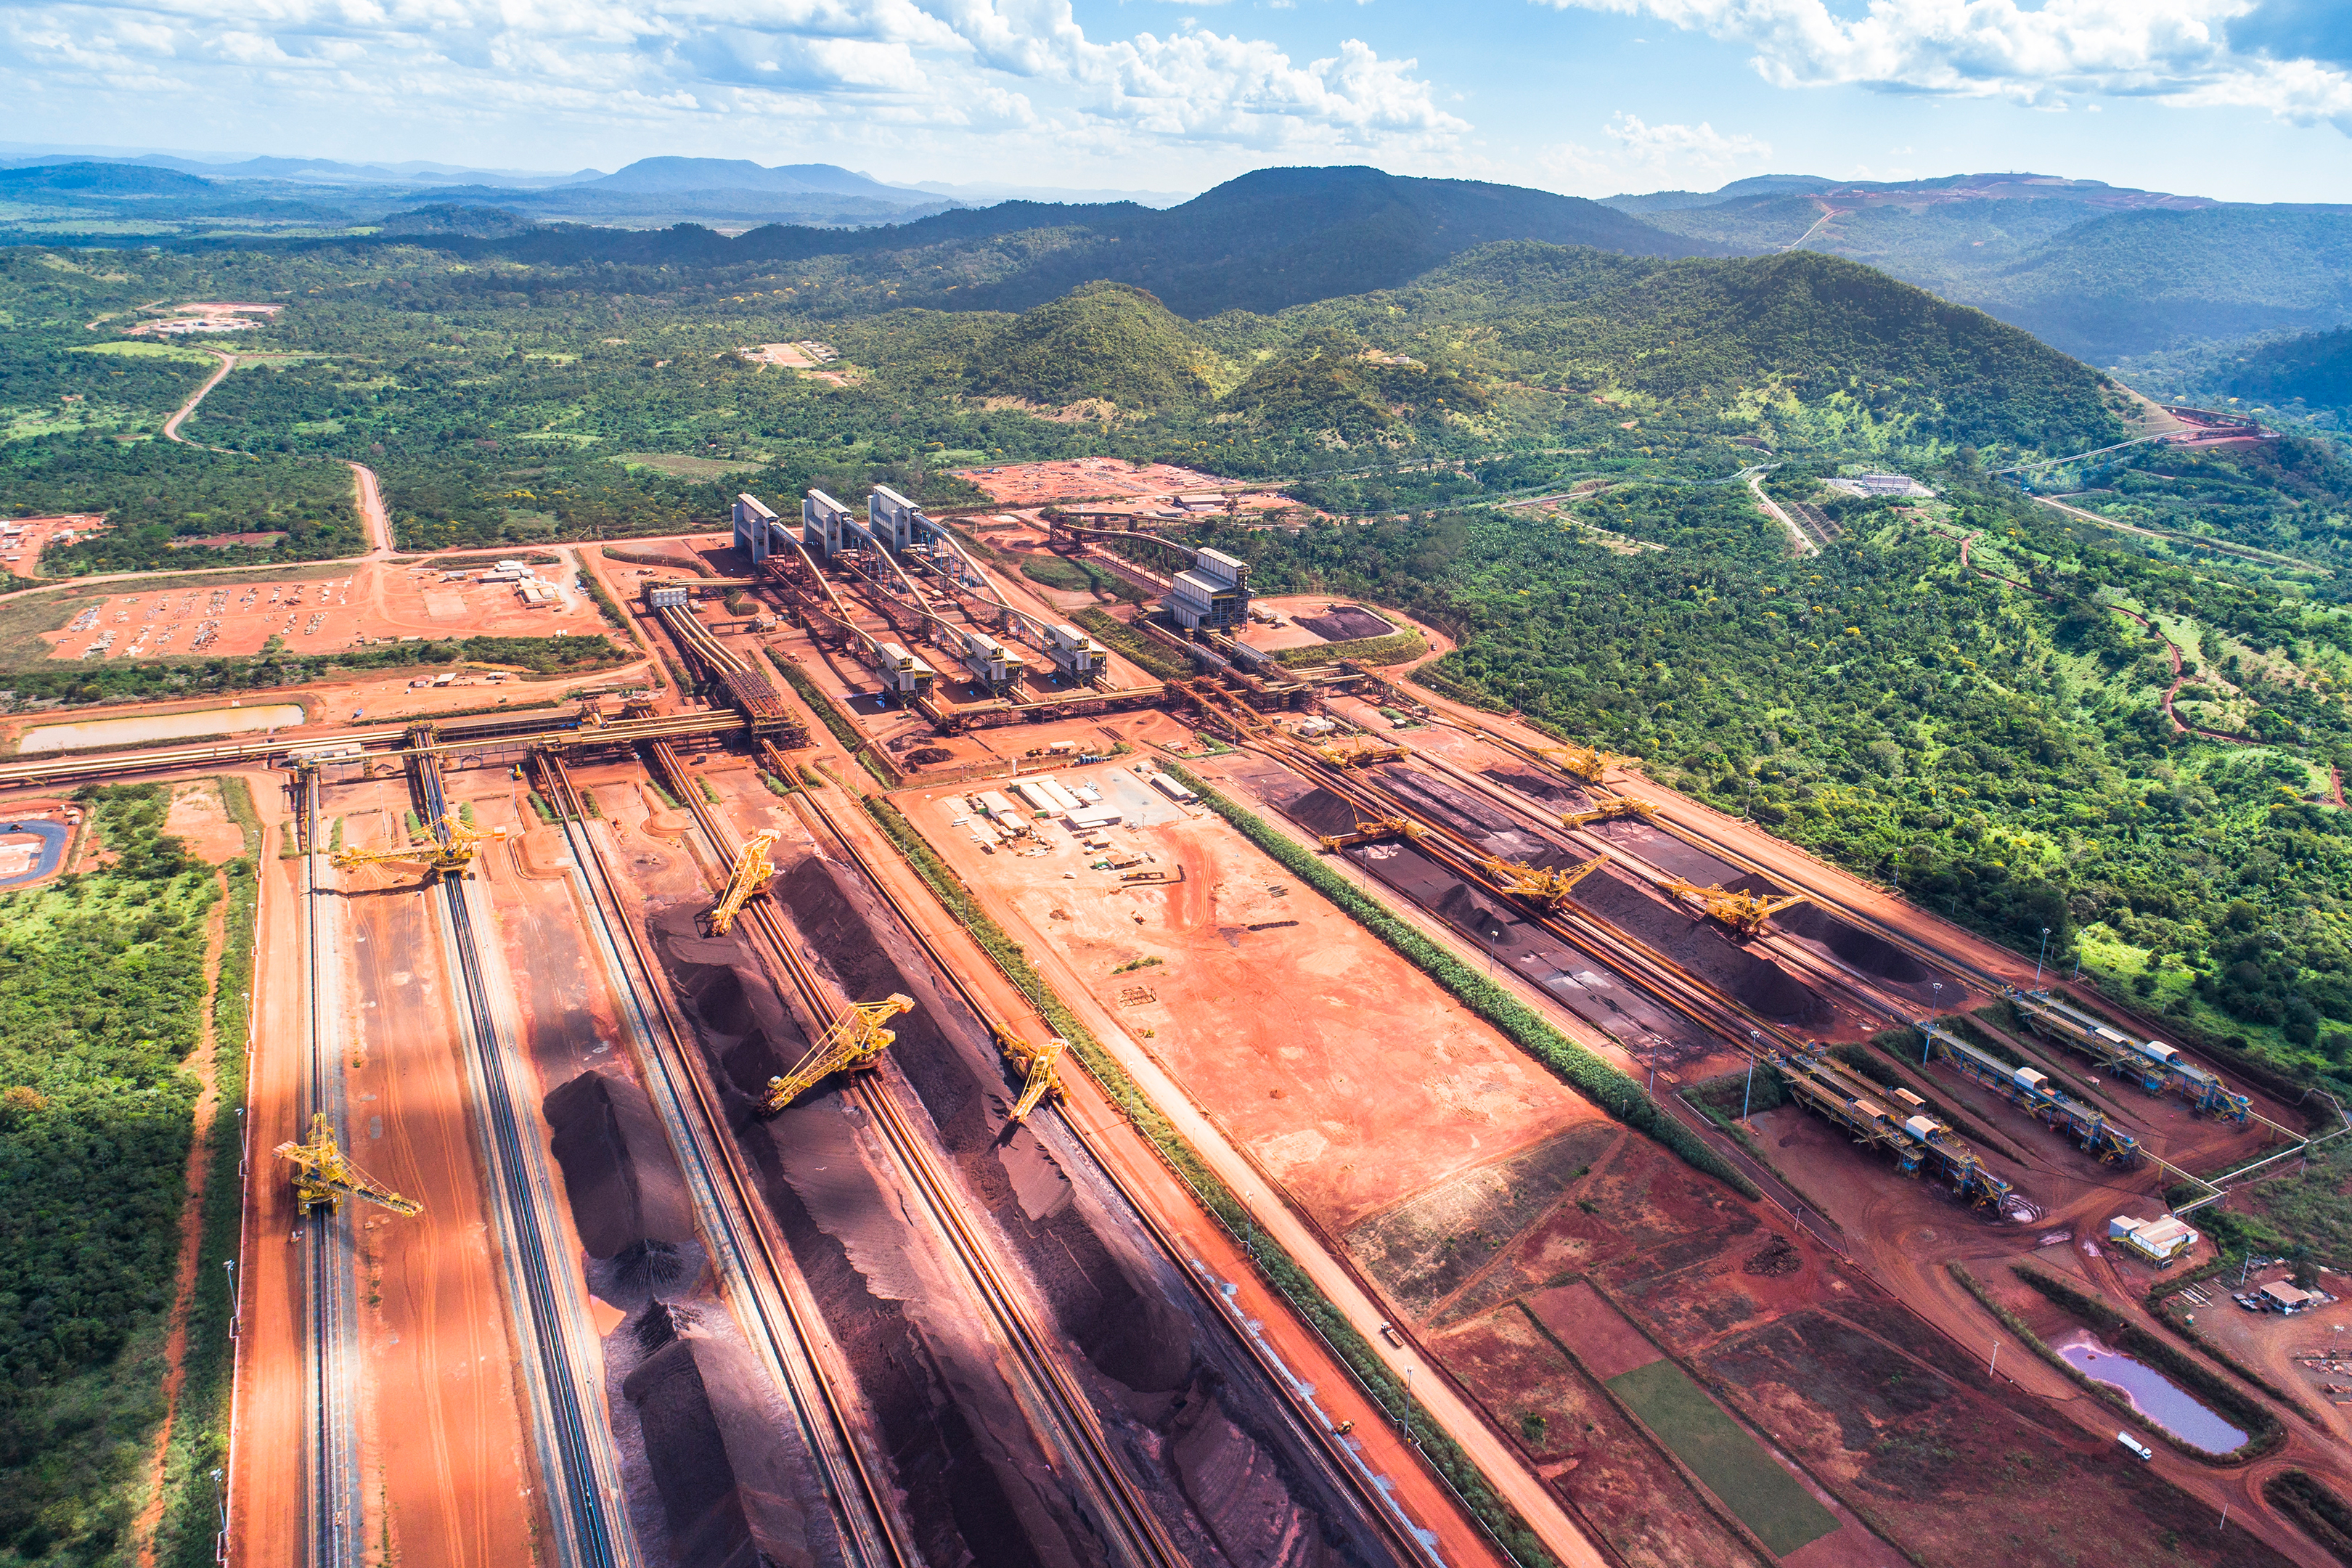 Aerial view of the mining plant and stockyard of the S11D Complex, the world's largest open-pit iron ore mine, controlled by Vale, in the Carajás region of Pará state. Ricardo Teles/ Agência Vale